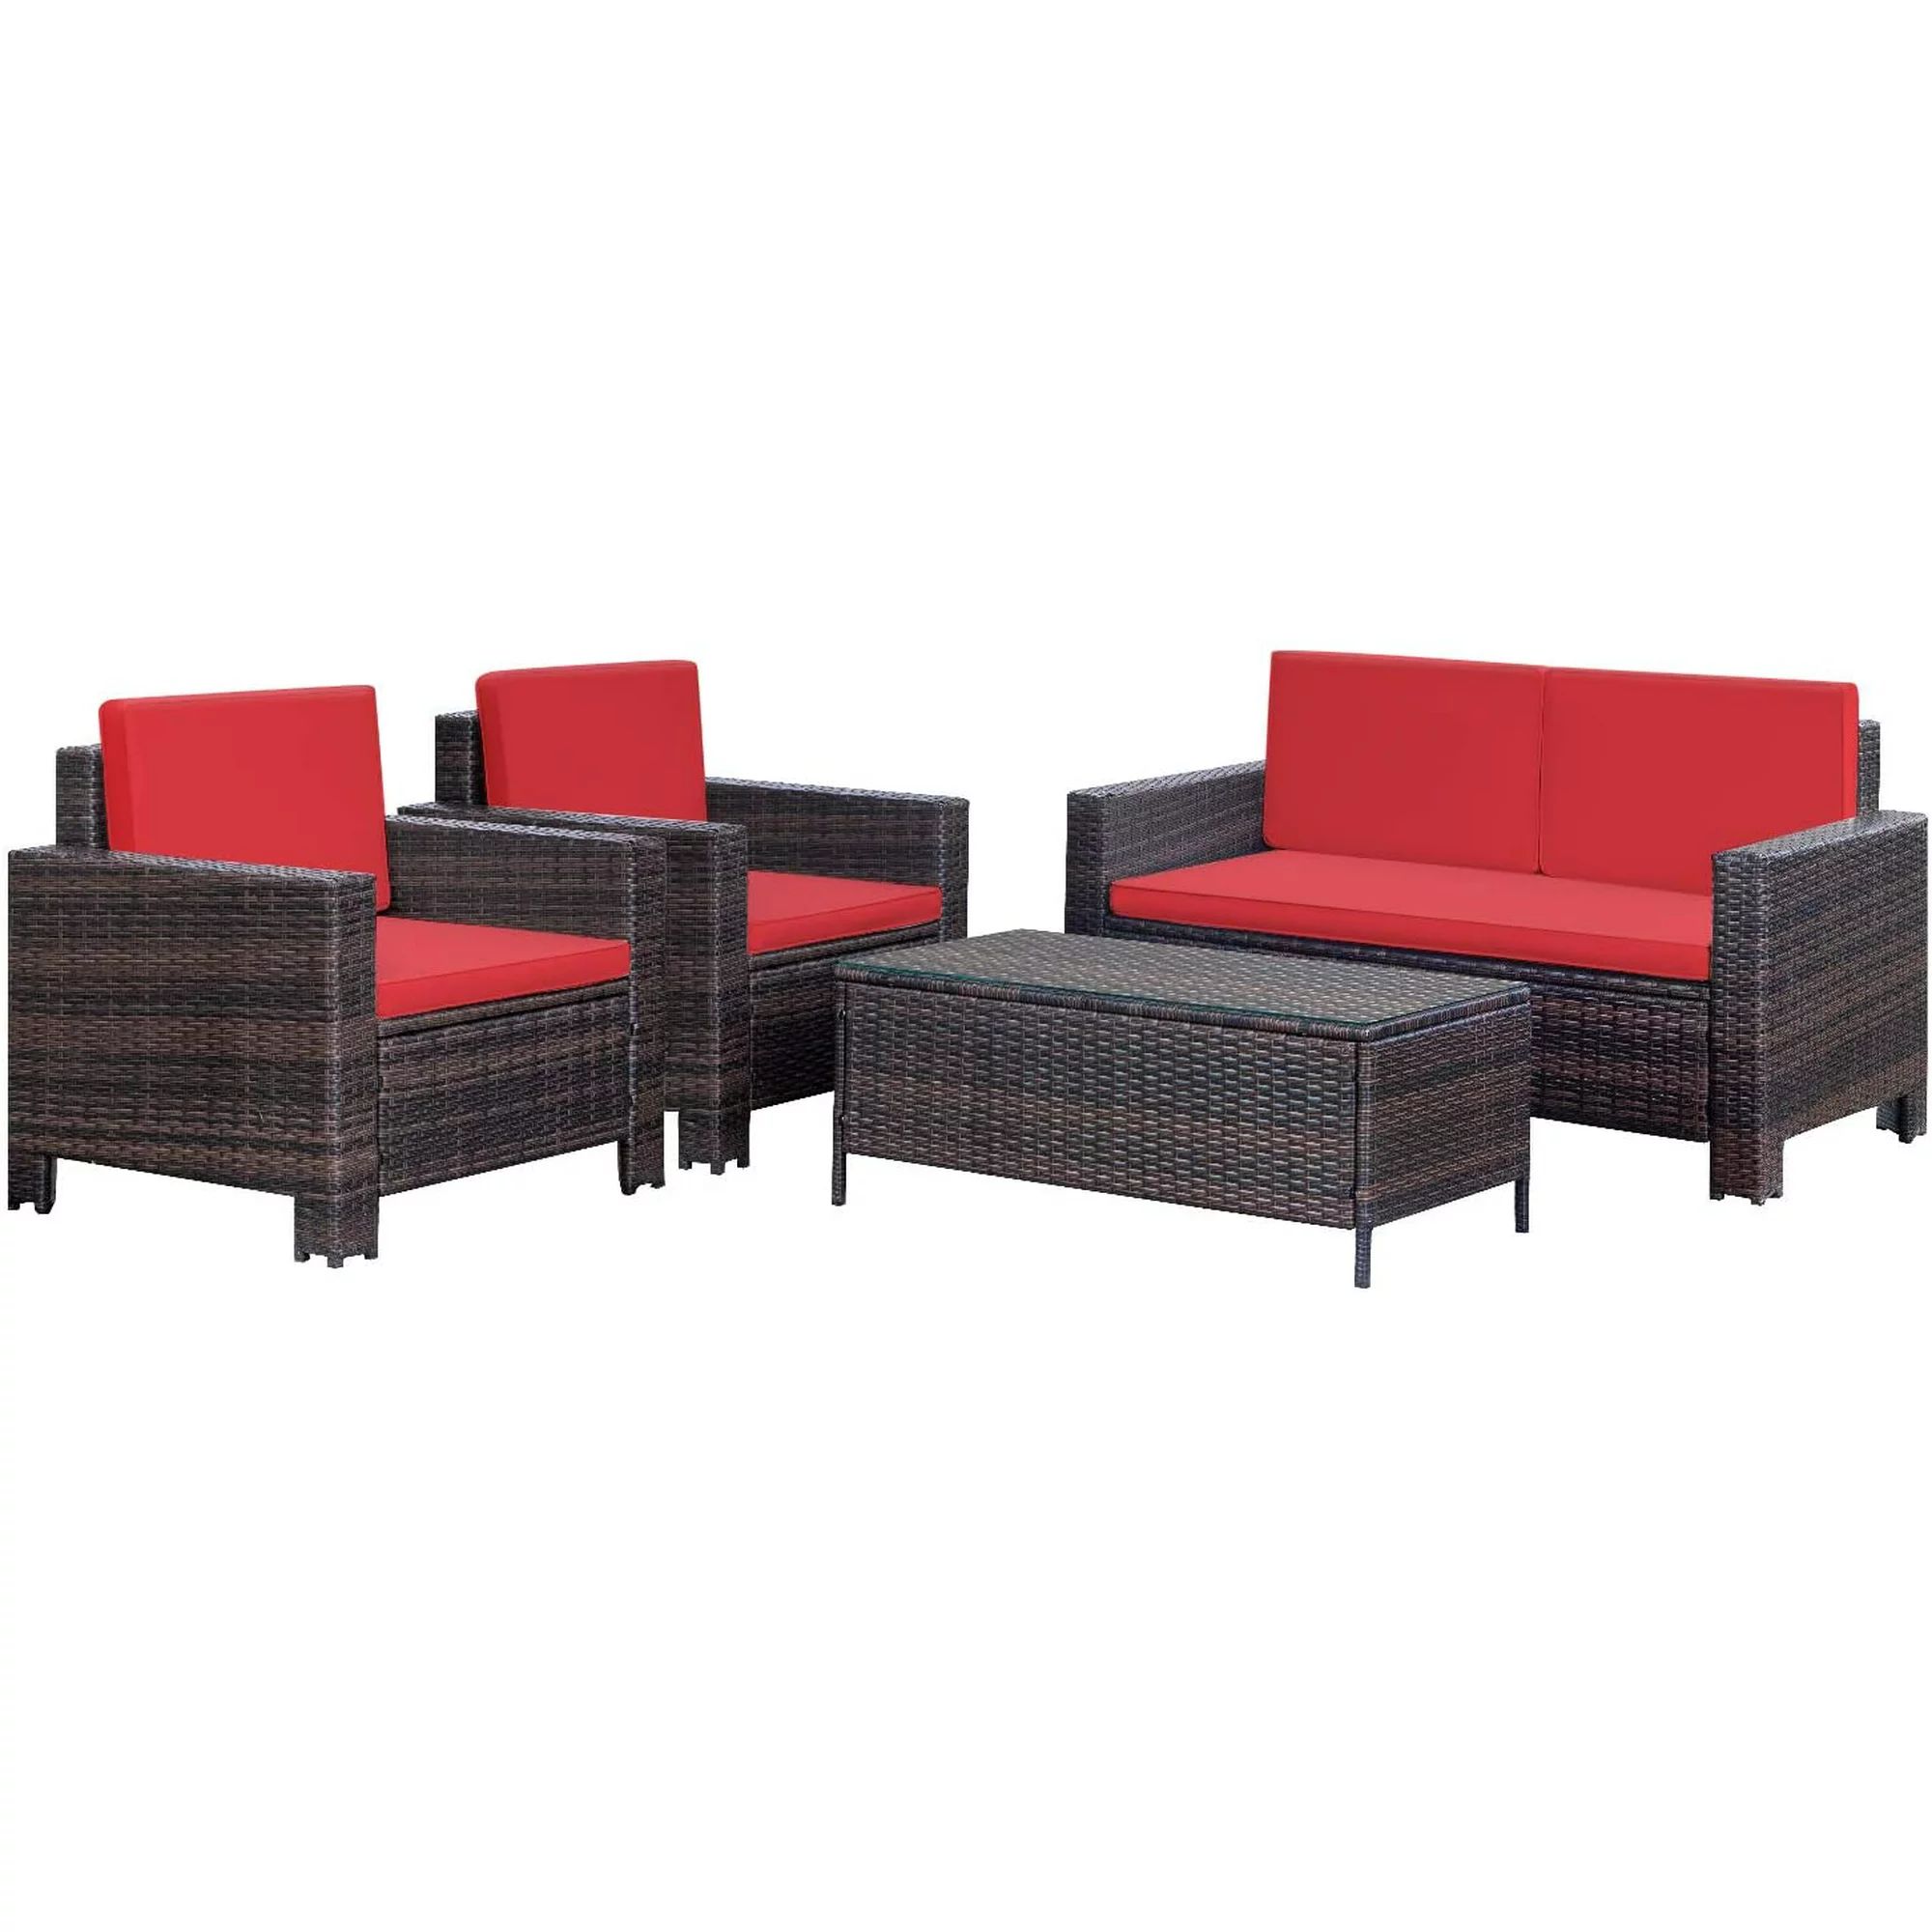 Walnew 4-Piece Wicker Outdoor Patio Conversation Set with Cushions, Brown/Red | Walmart (US)